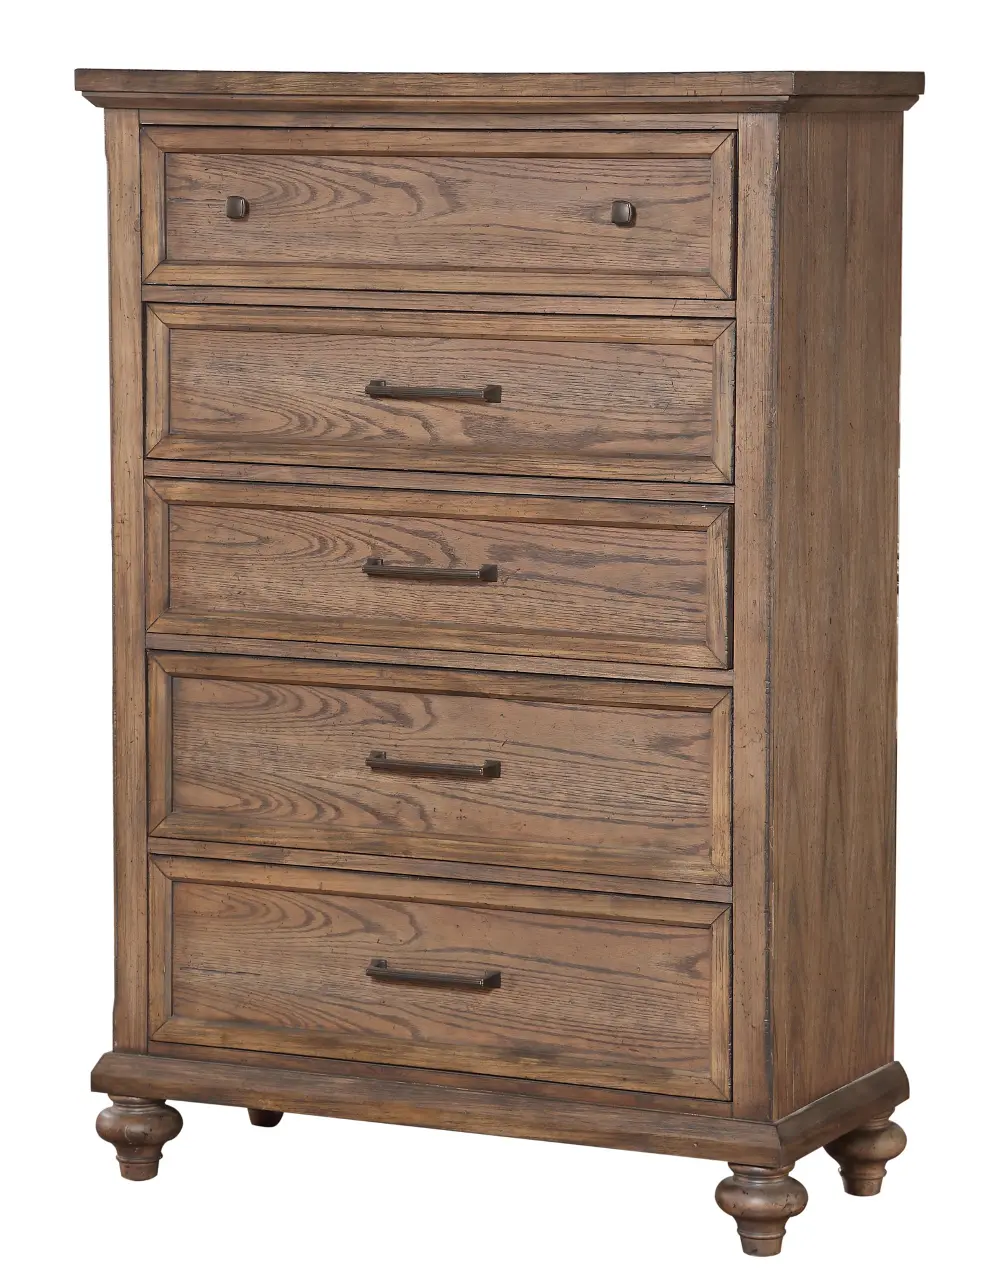 Classic Traditional Oak Chest of Drawers - Franklin-1